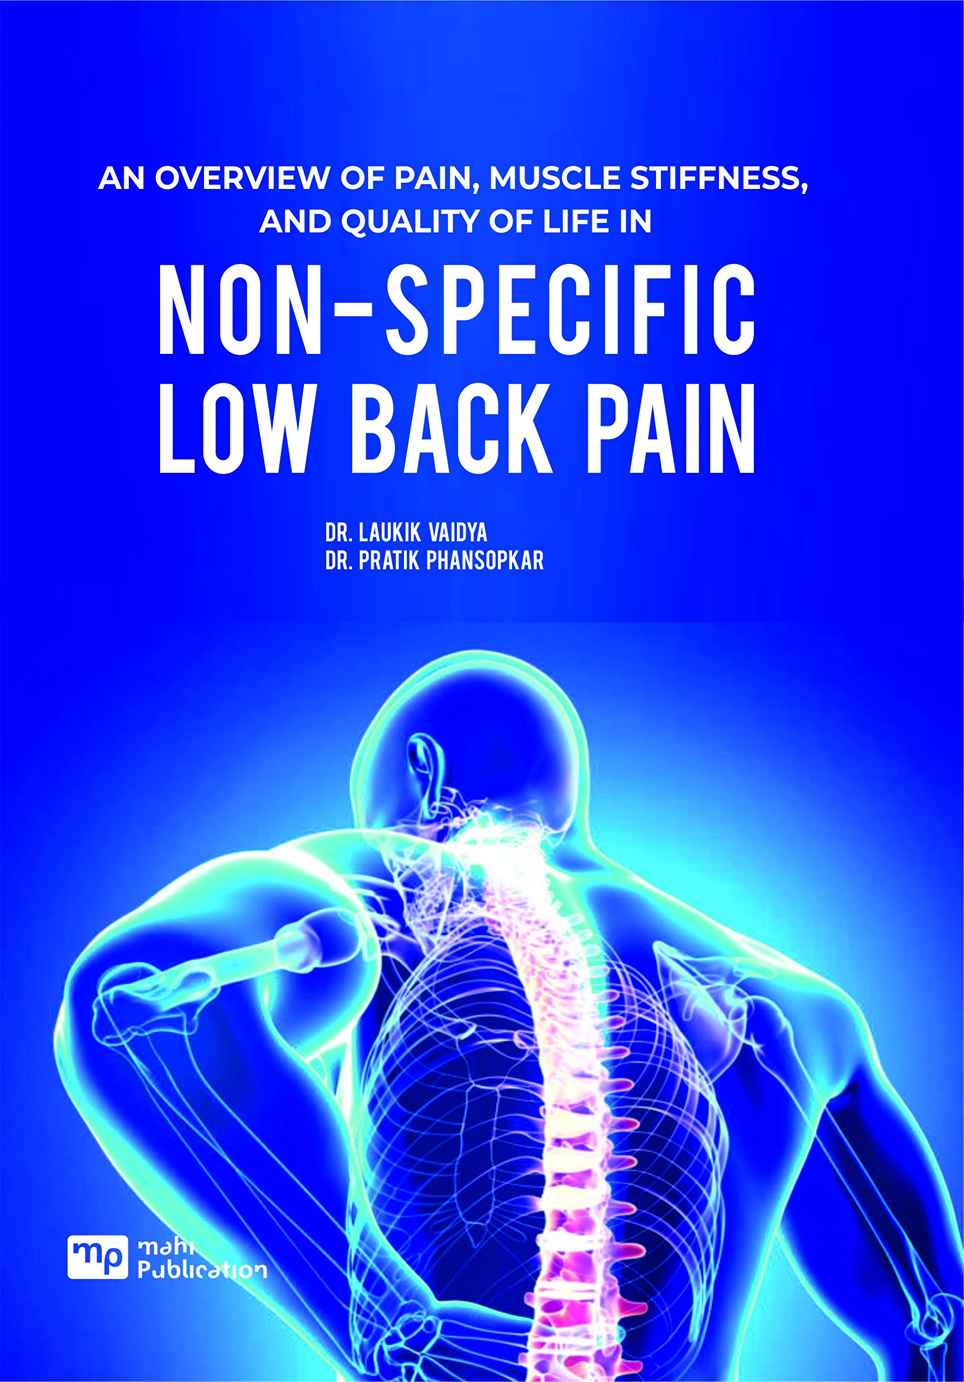 An Overview of Pain, Muscle Stiffness, Non-specific Low Back Pain and Quality of Life in Non-specific Low Back Pain